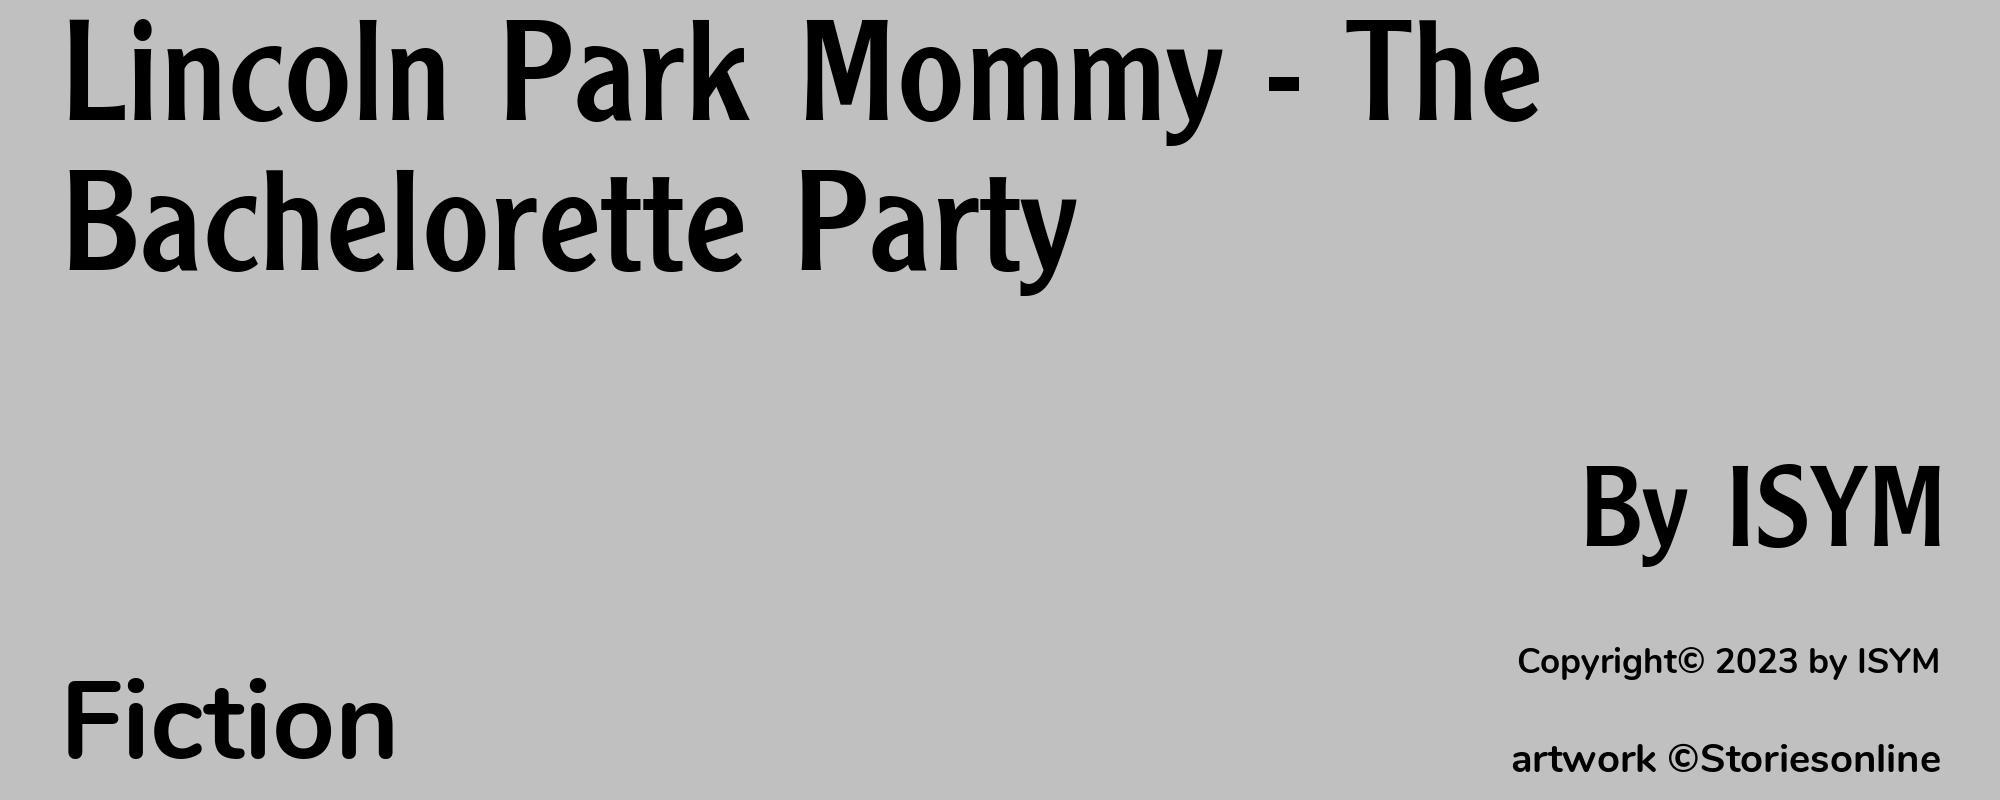 Lincoln Park Mommy - The Bachelorette Party - Cover